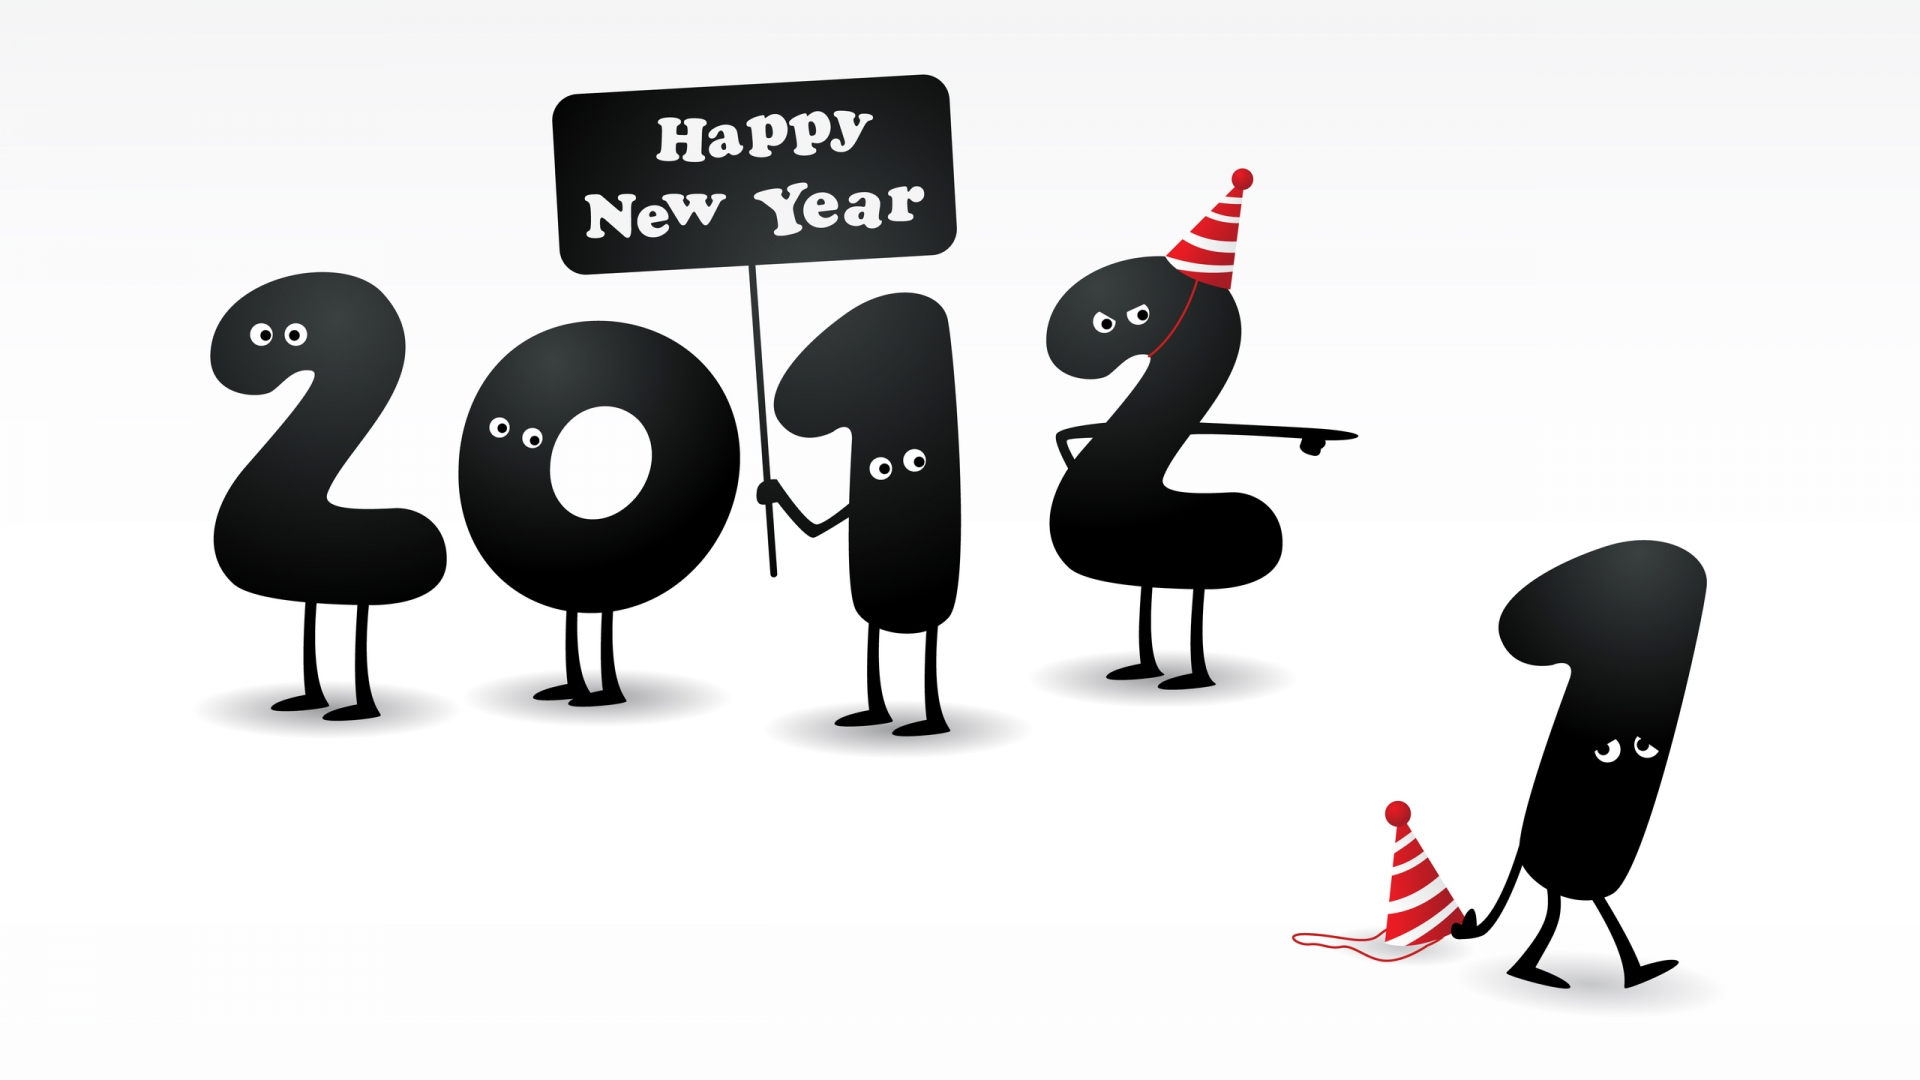 2012 Happy New Year for 1920 x 1080 HDTV 1080p resolution